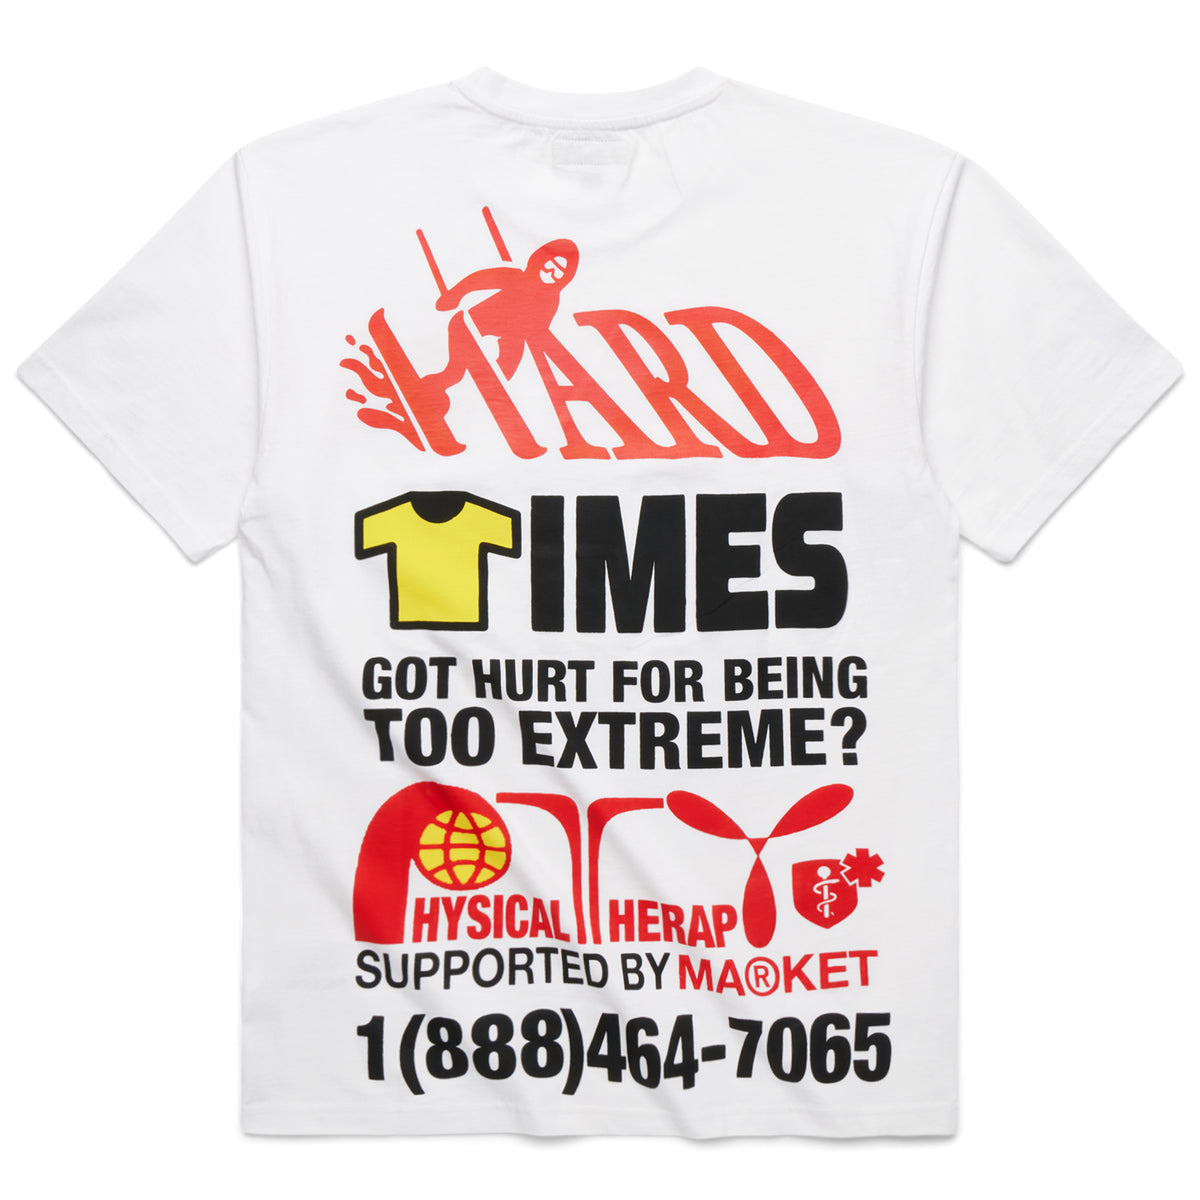 MARKET HARD TIMES PHYSICAL THERAPY T-SHIRT